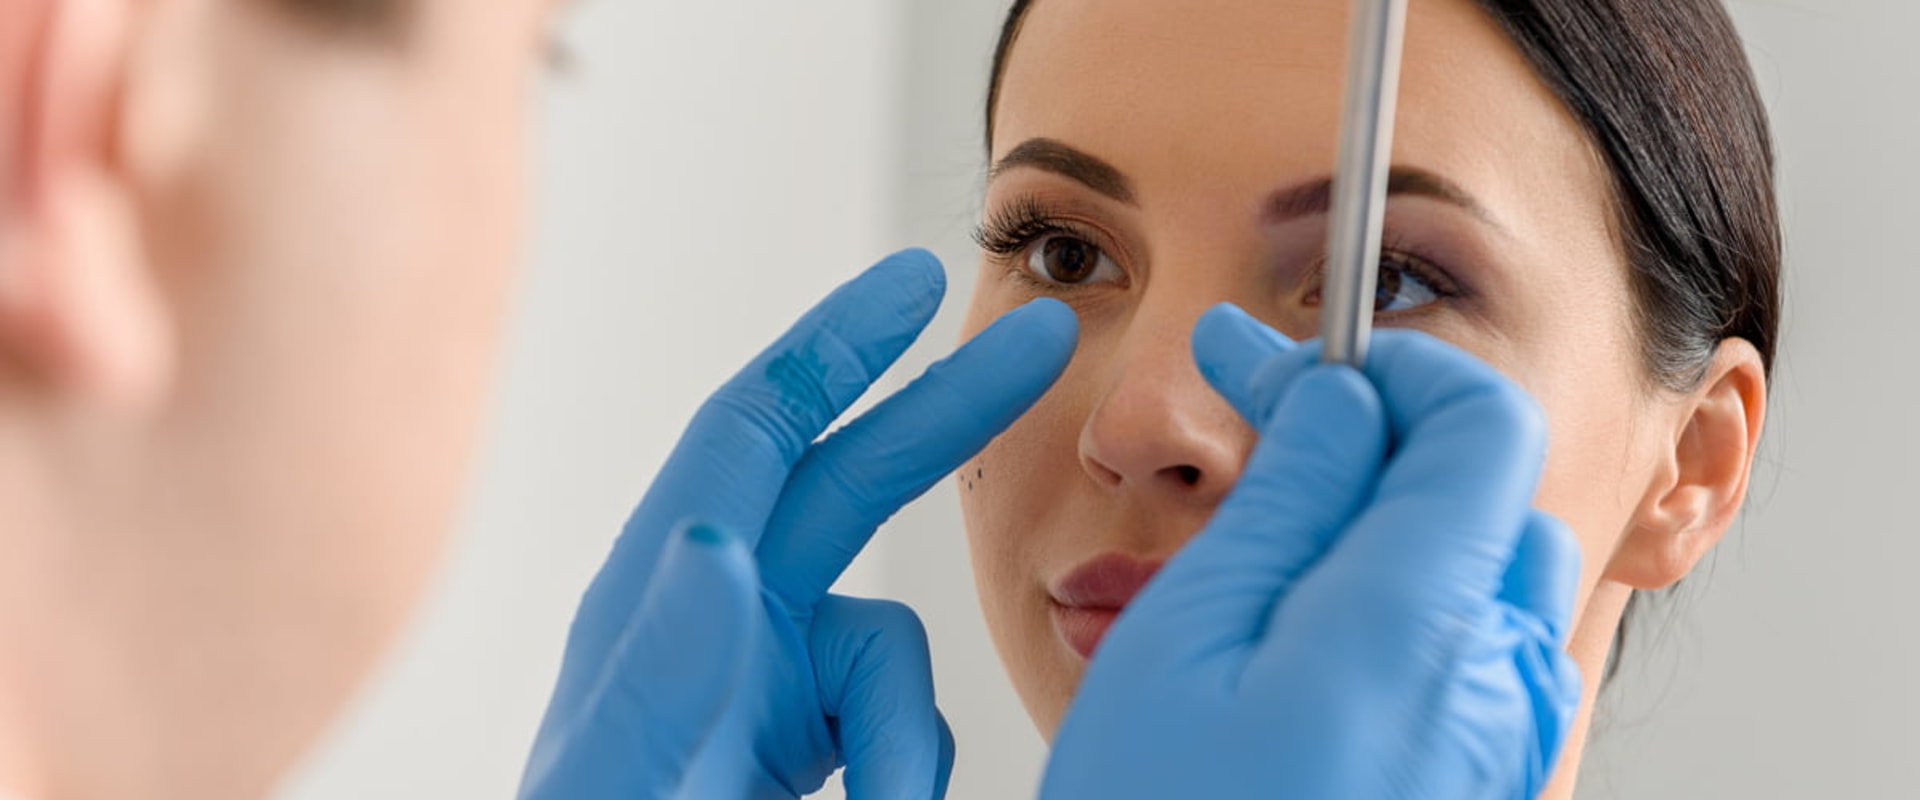 The Ethical Considerations of Aesthetic Surgery Procedures